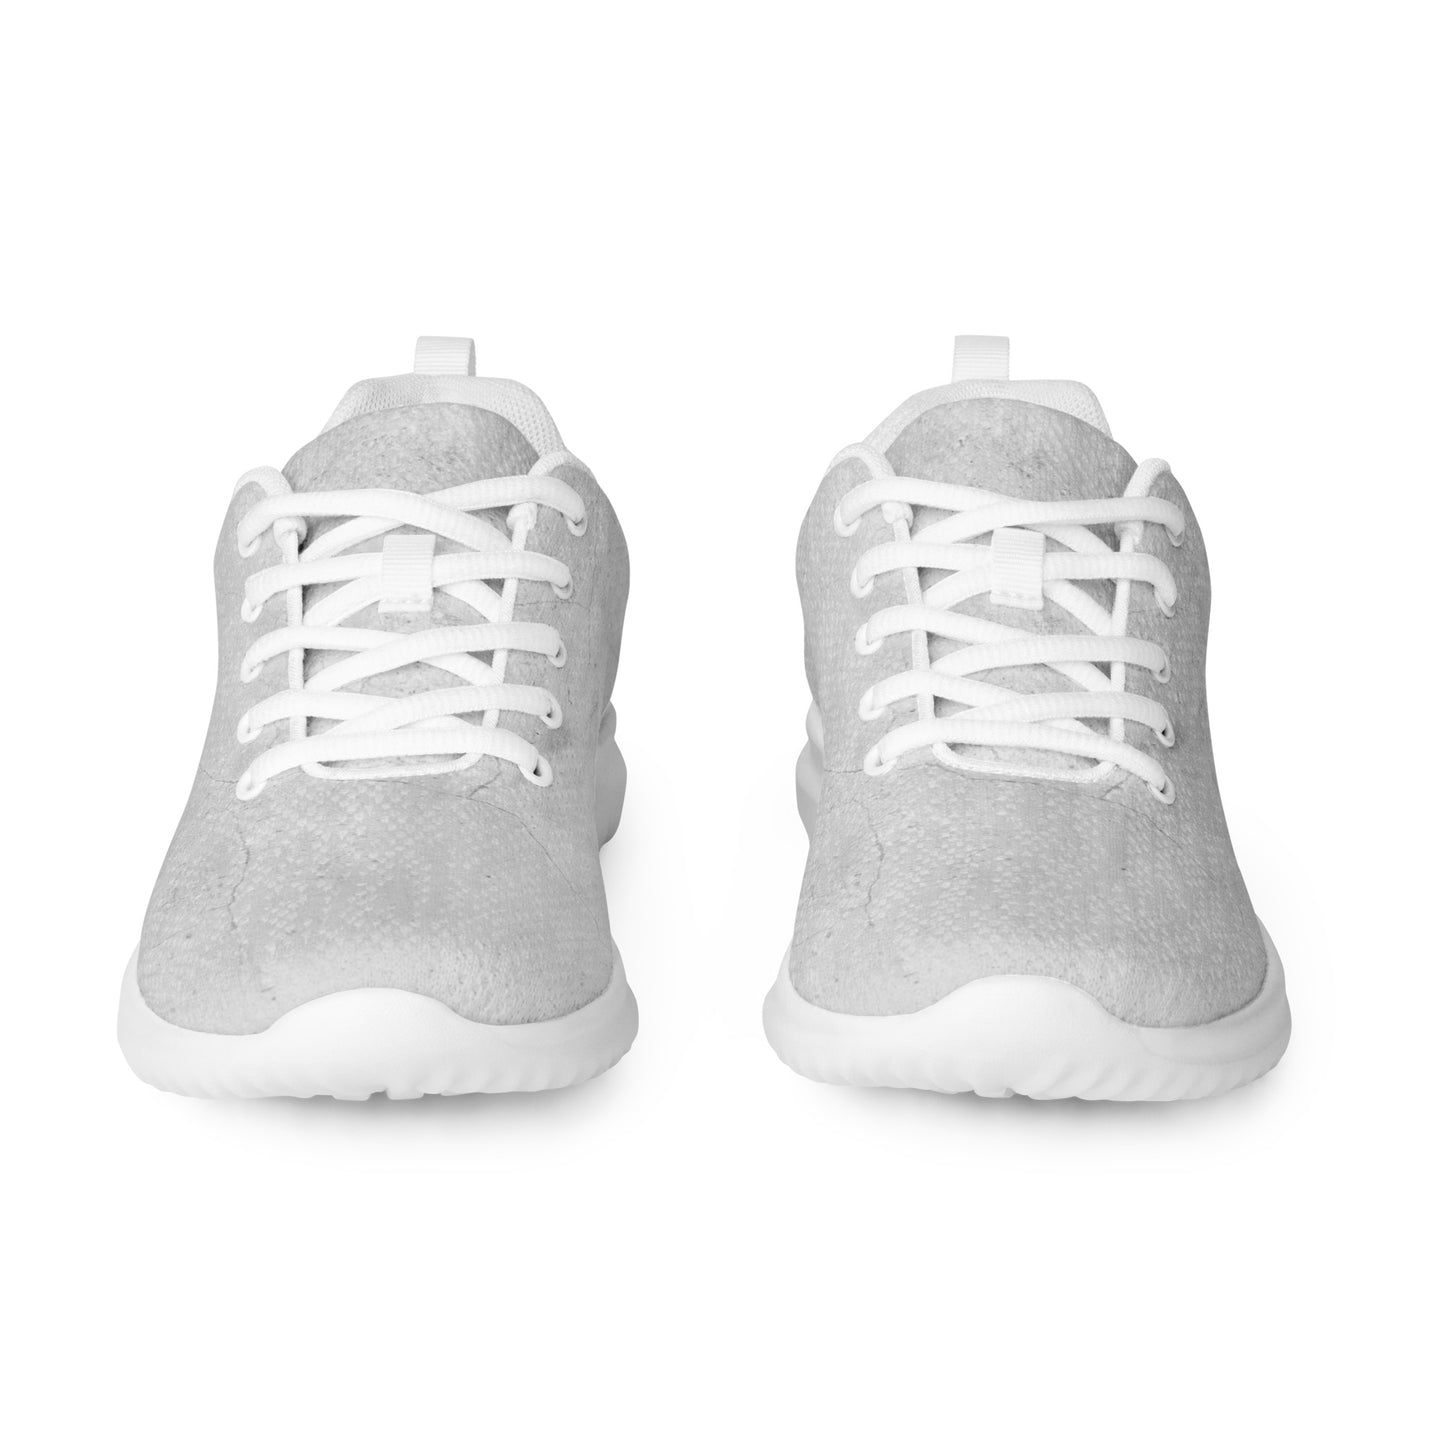 DASH Marble Gray Women’s Athletic Shoes Lightweight Breathable Design by IOBI Original Apparel